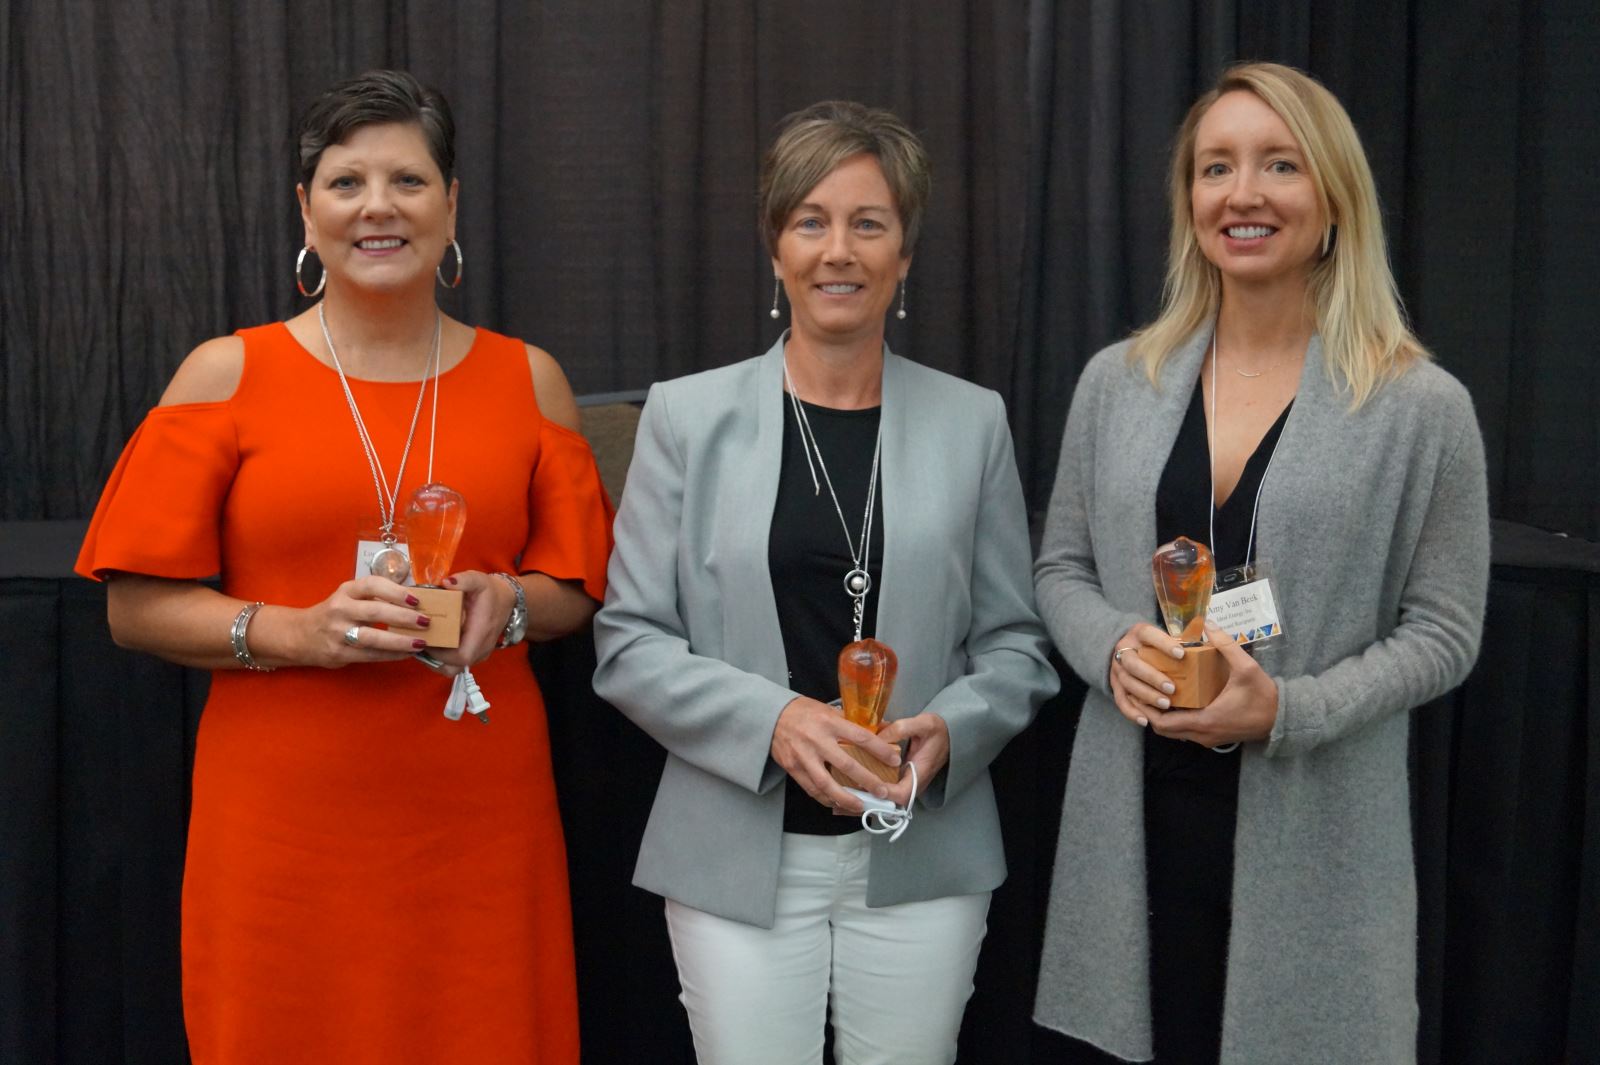 Agri-Industrial Plastics receives innovation award for clean energy initiatives